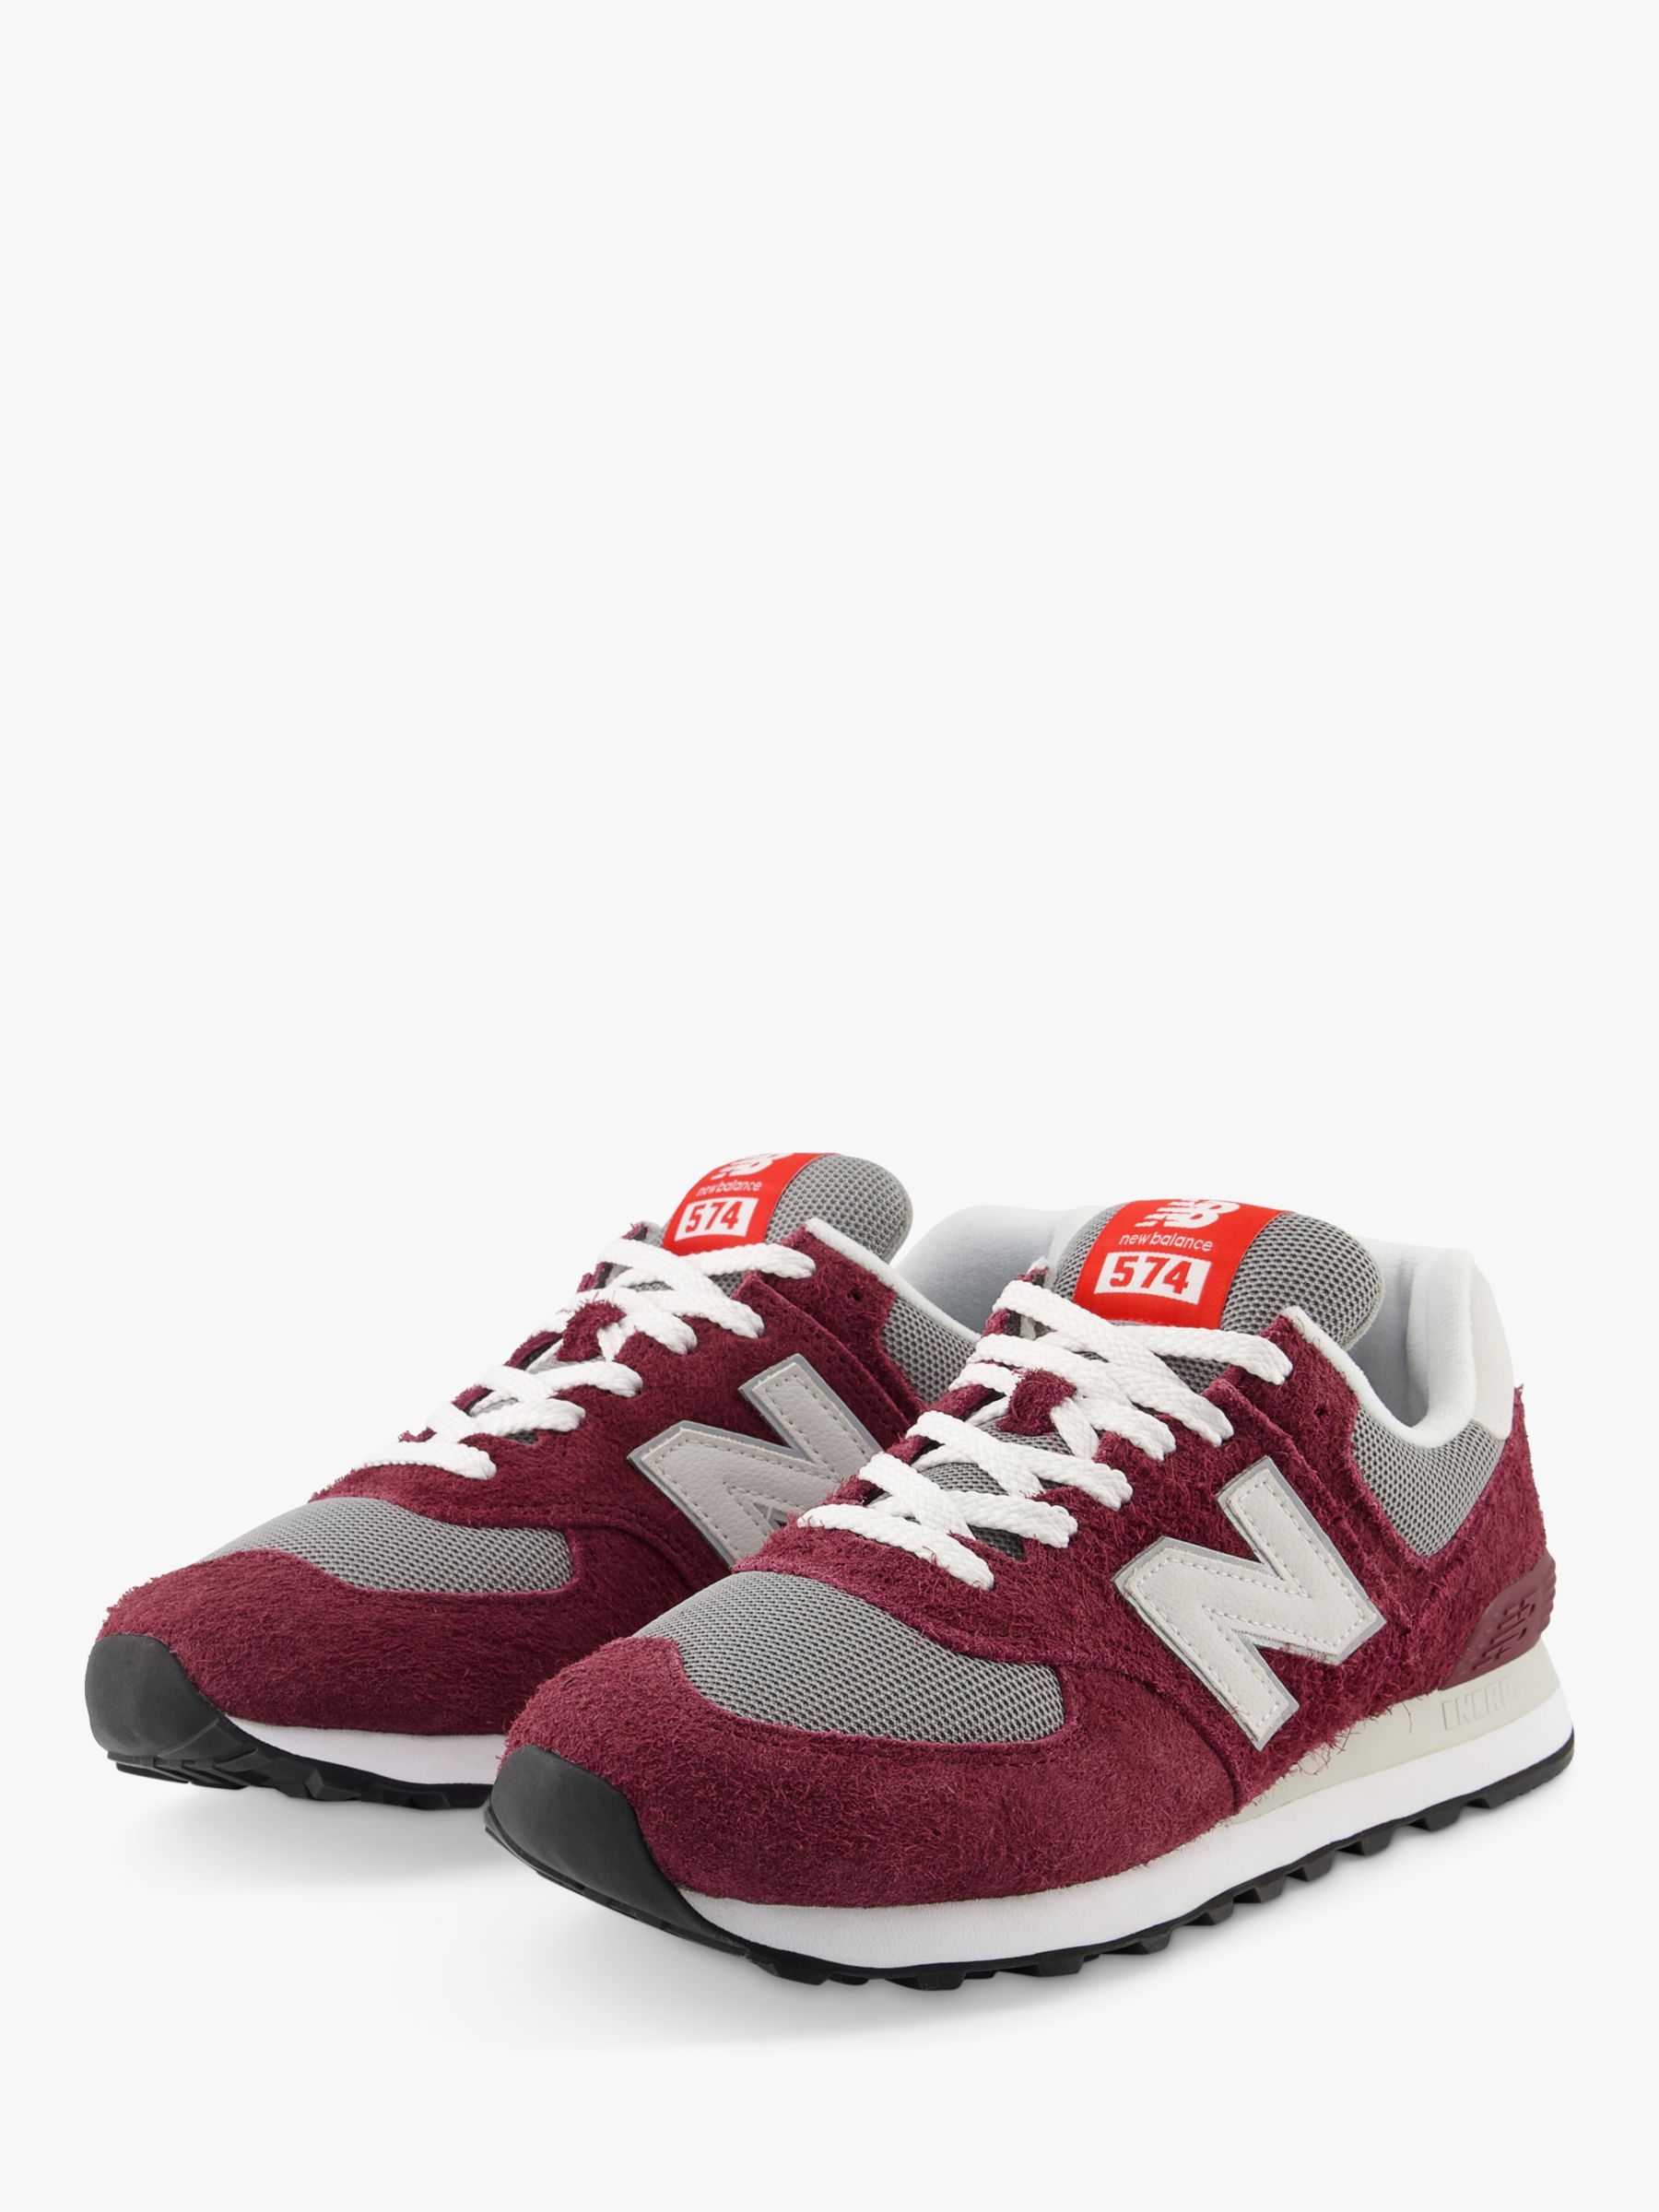 Buy New Balance 574 Suede Trainers, Red/Grey Online at johnlewis.com